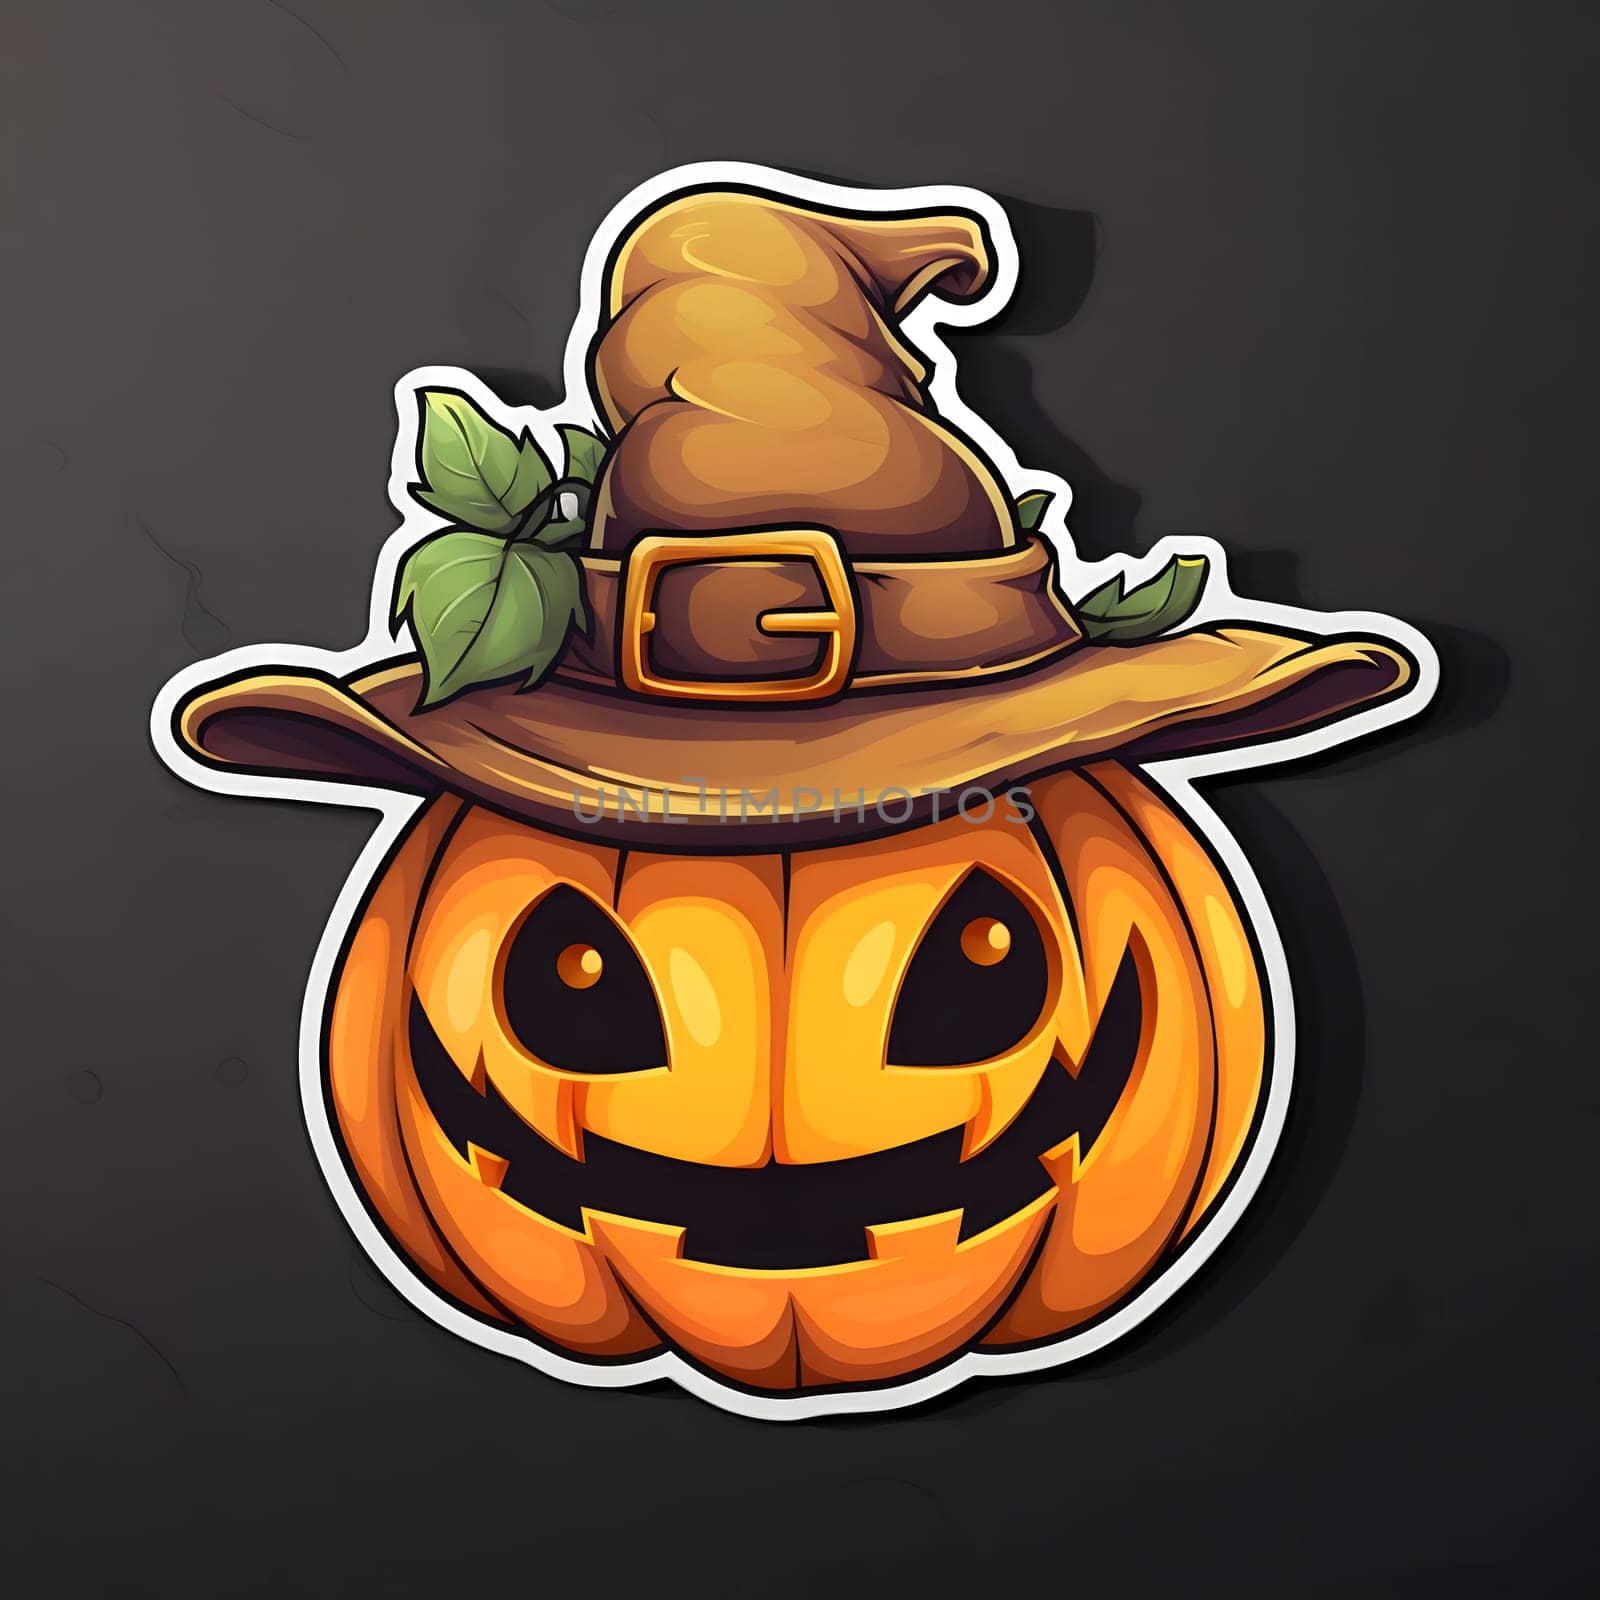 Jack-o-lantern pumpkin sticker with witch hat, Halloween image on a dark isolated background. by ThemesS